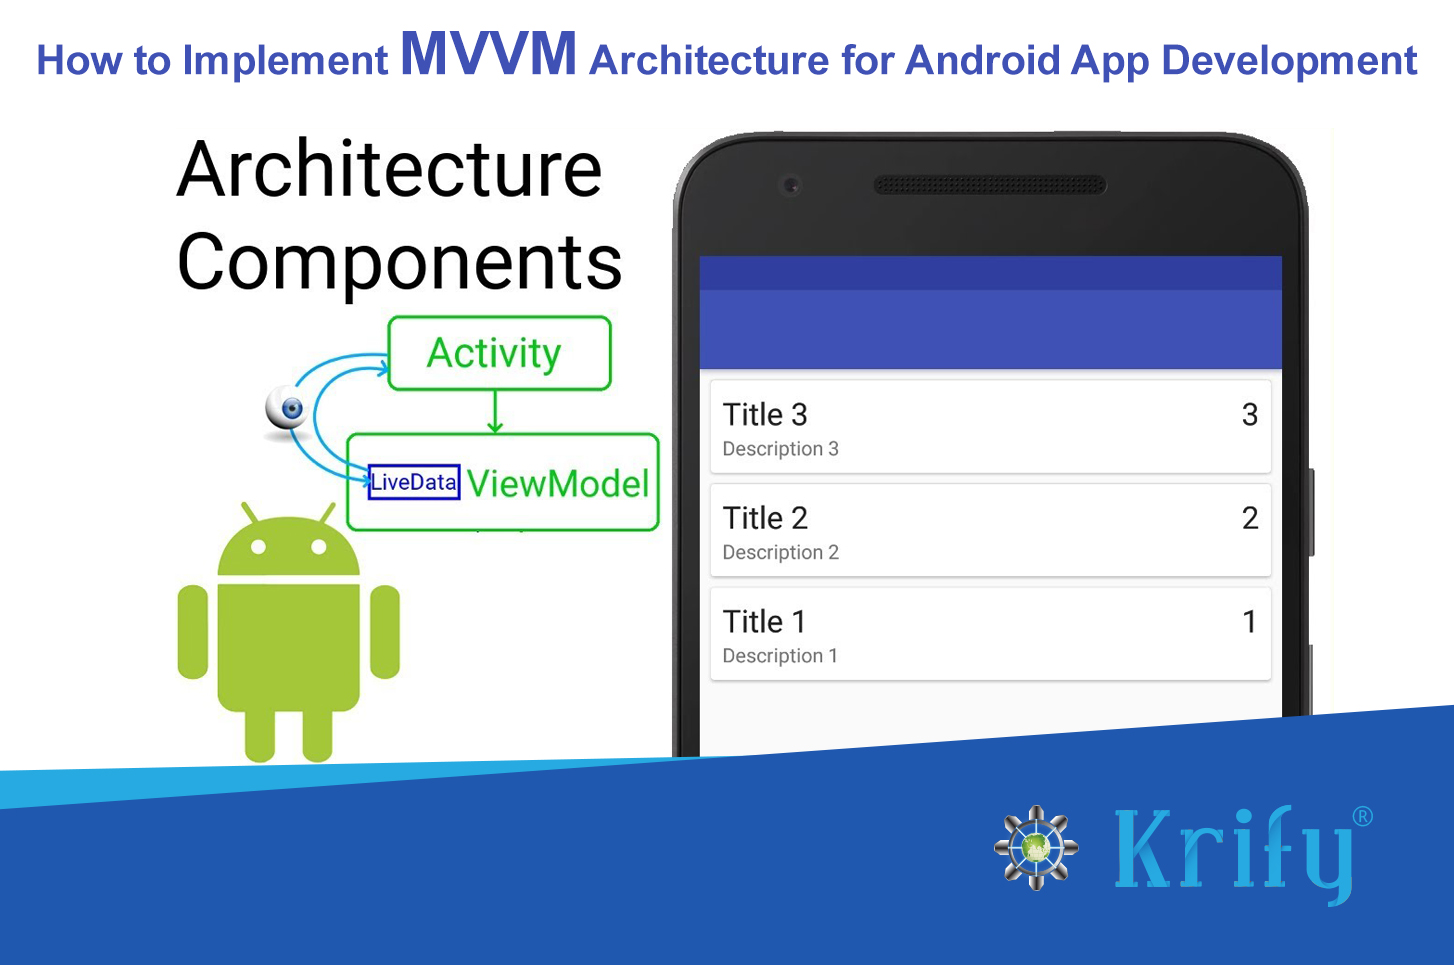 MVVM Architecture for Android App Development